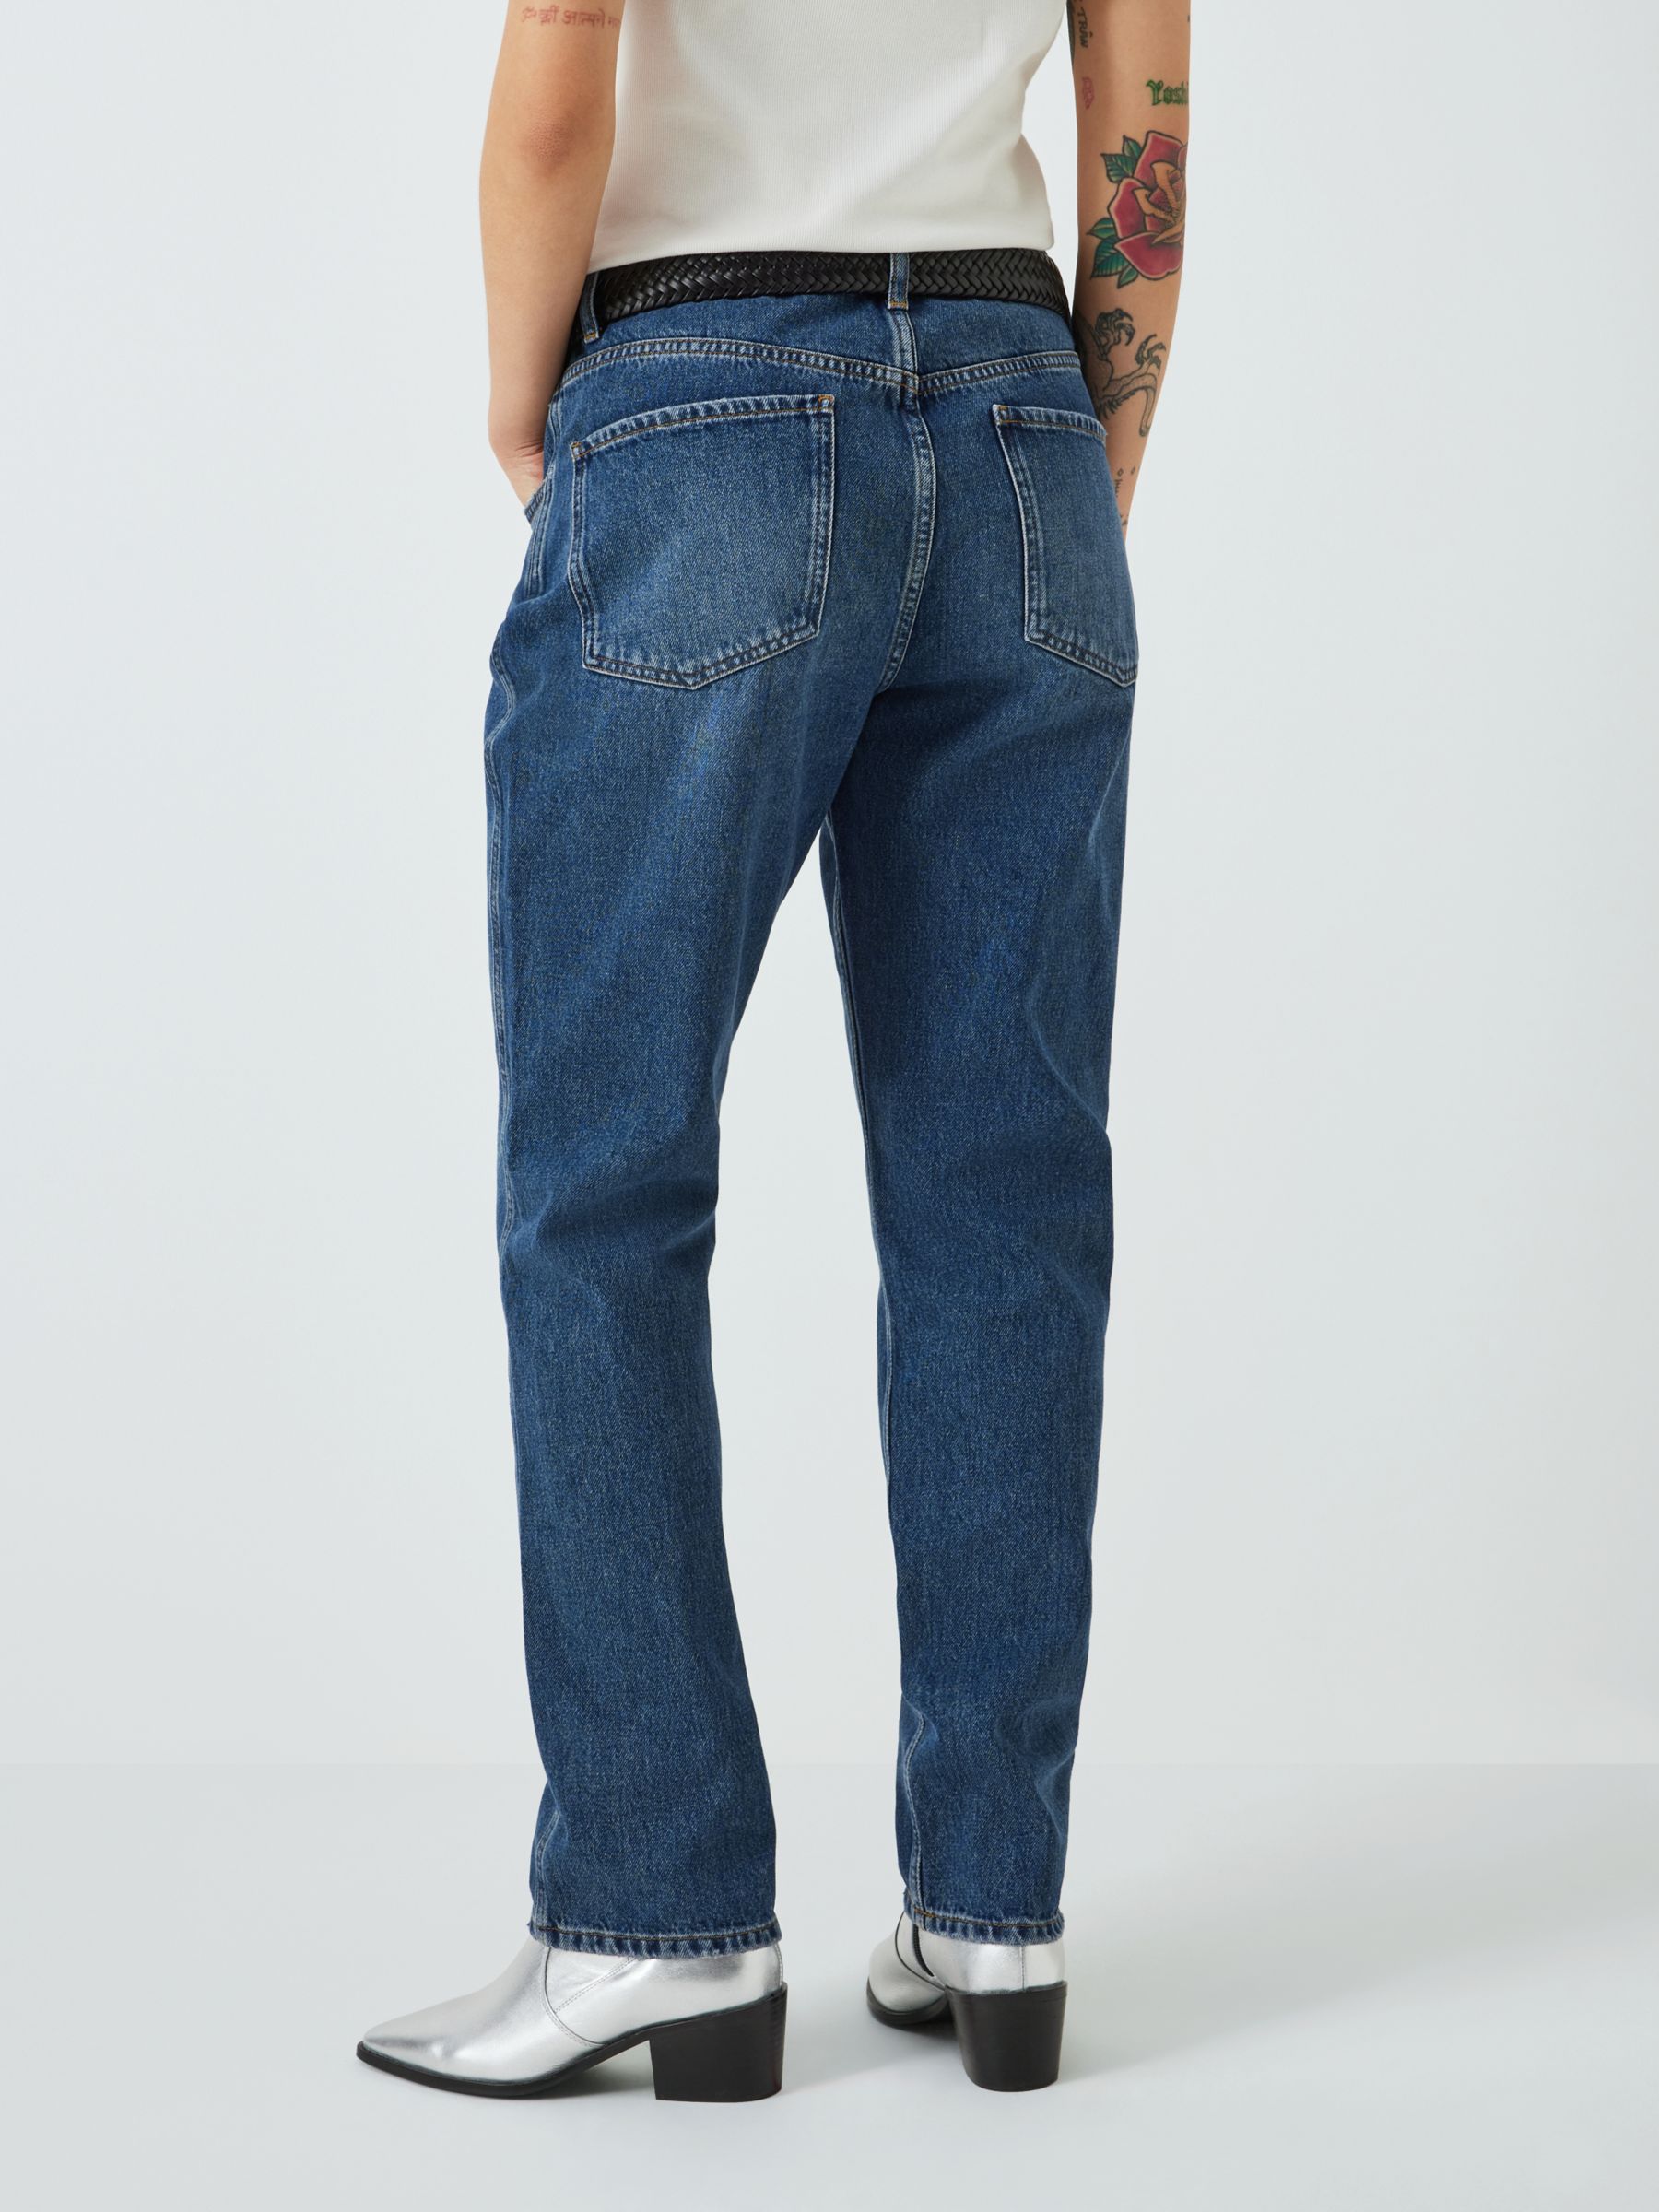 AND/OR Melrose Straight Cut Jeans, Dark Blue Wash, 34R